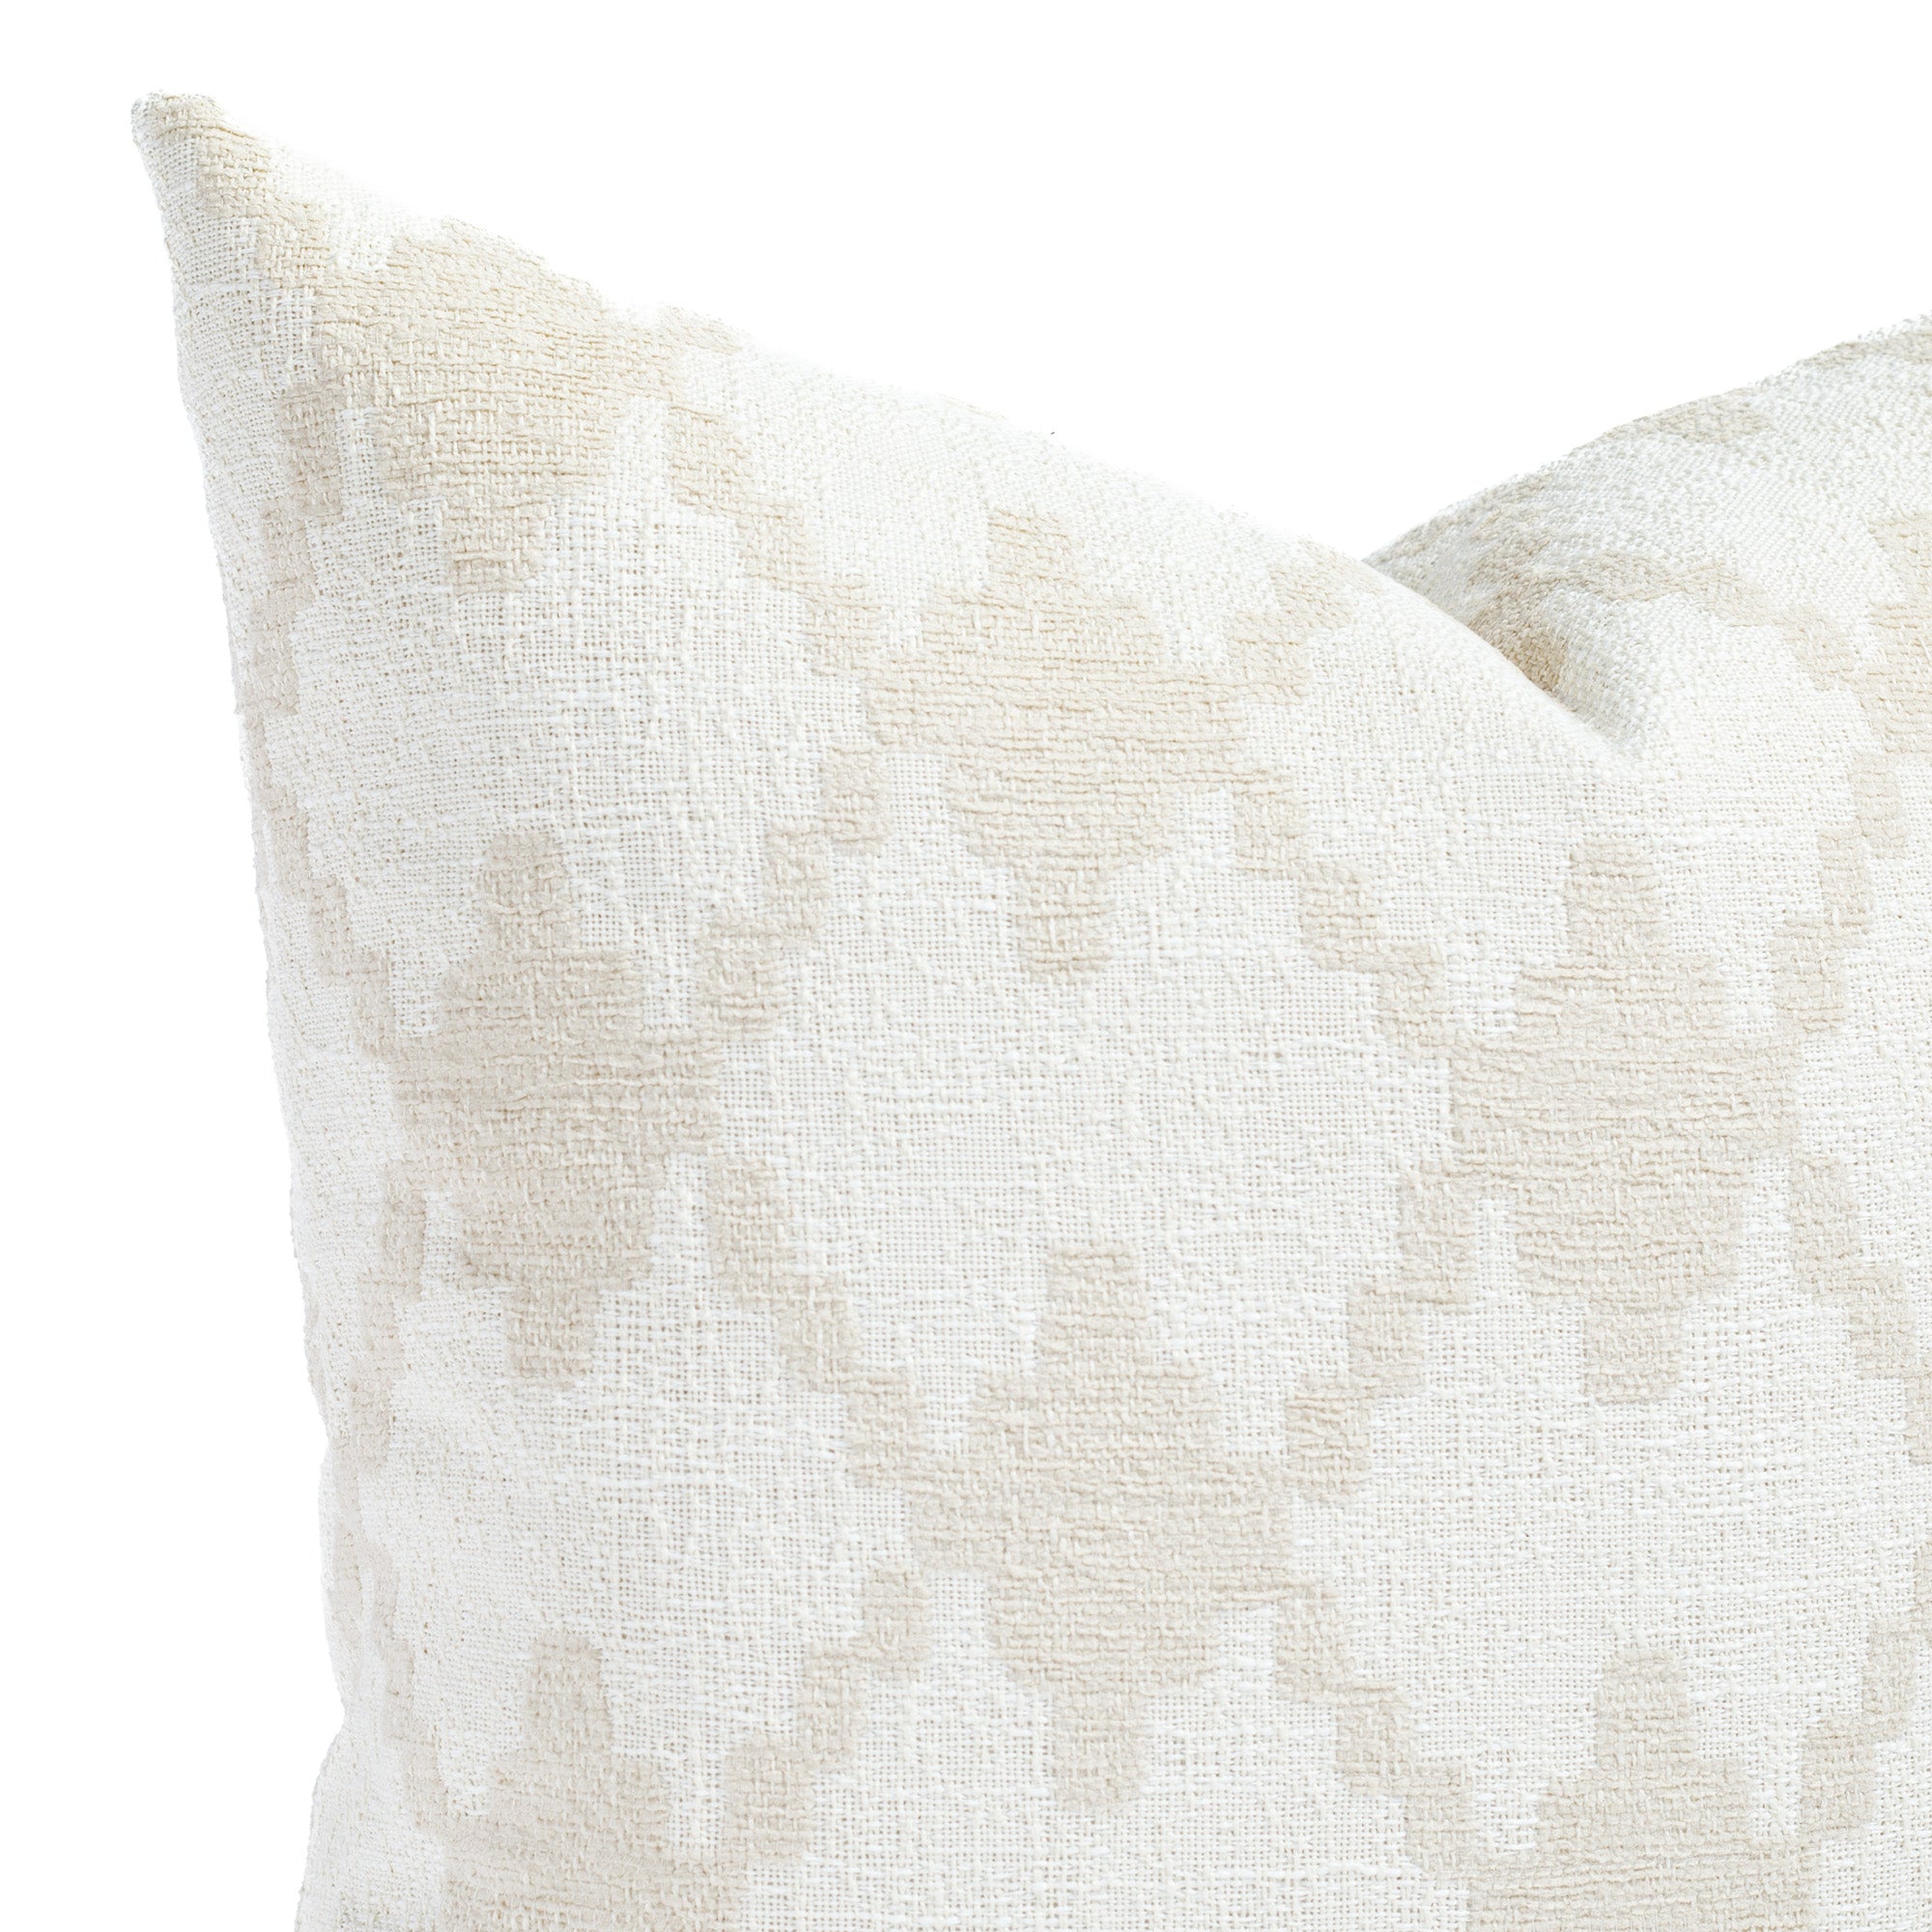 a white and beige diamond trellis patterned pillow: close up view